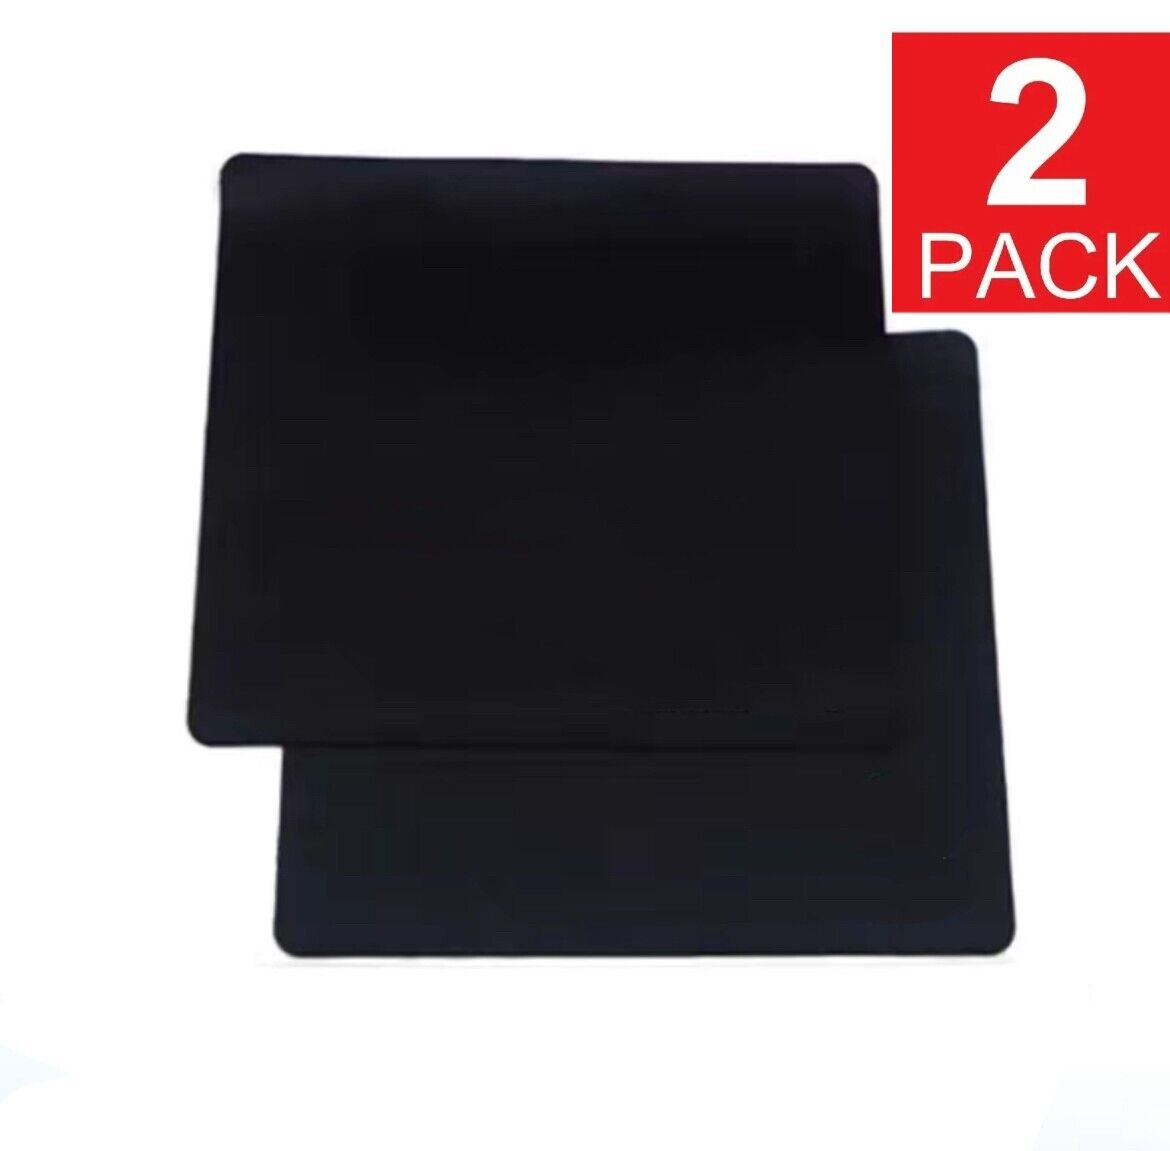 Office , gaming mouse pad,thick，anti slip and waterproof, high-quality - 2 pack